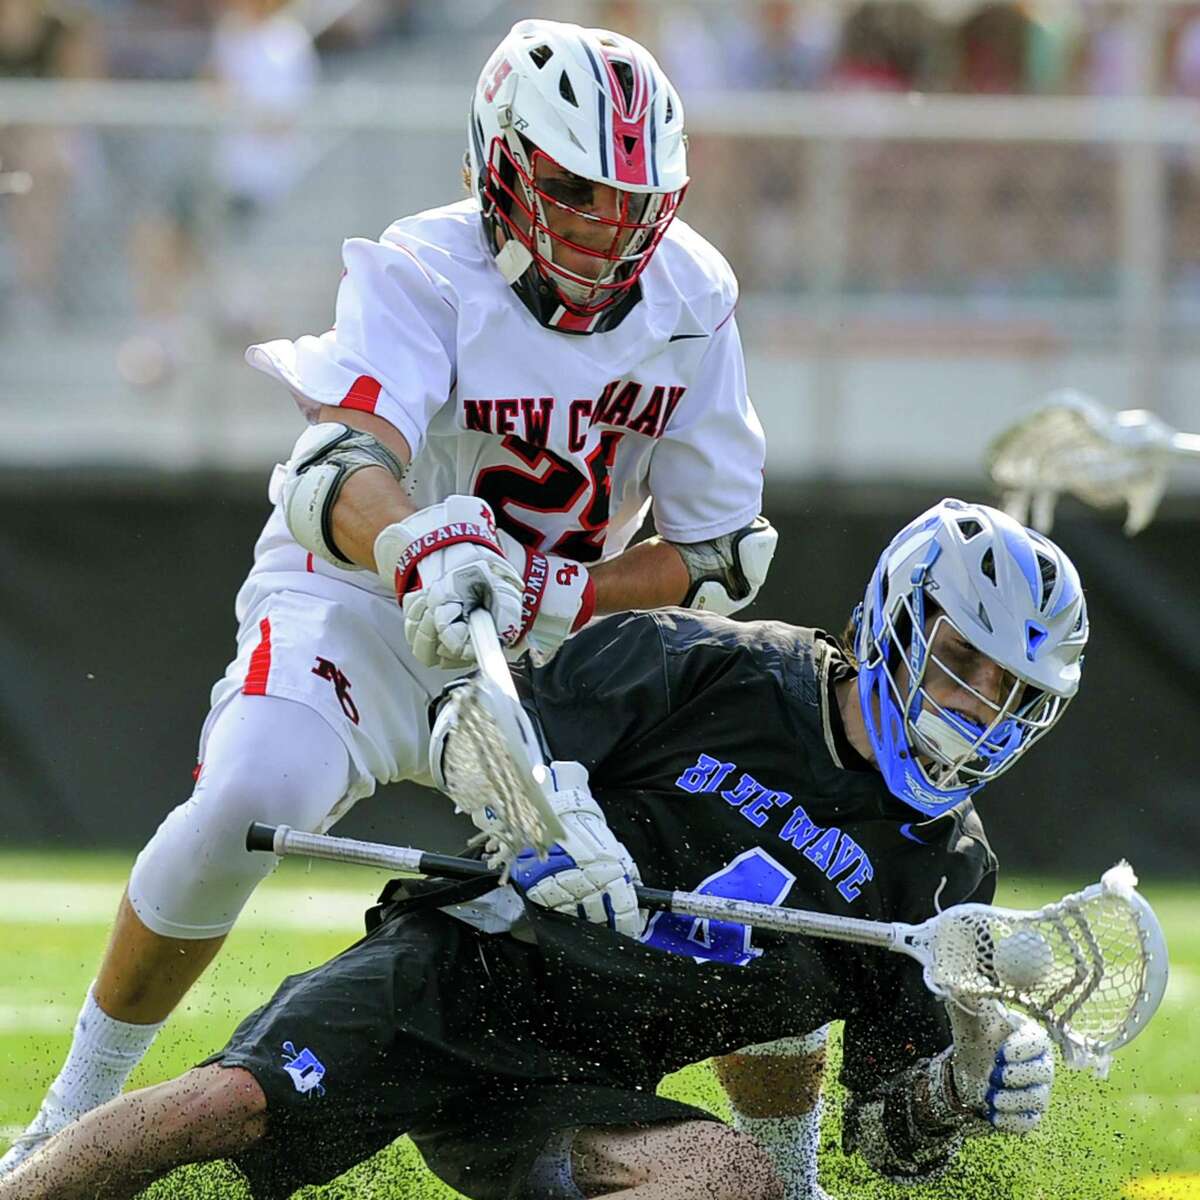 Darien Logan McGovern maintains control of the ball under pressure from New Canaan Andrew Bauersfeld in a FCIAC boys lacrosse game at New Canaan High School Dunning Field in New Canaan, Conn. on April 29, 2017. Darien defeated New Canaan 11-8.